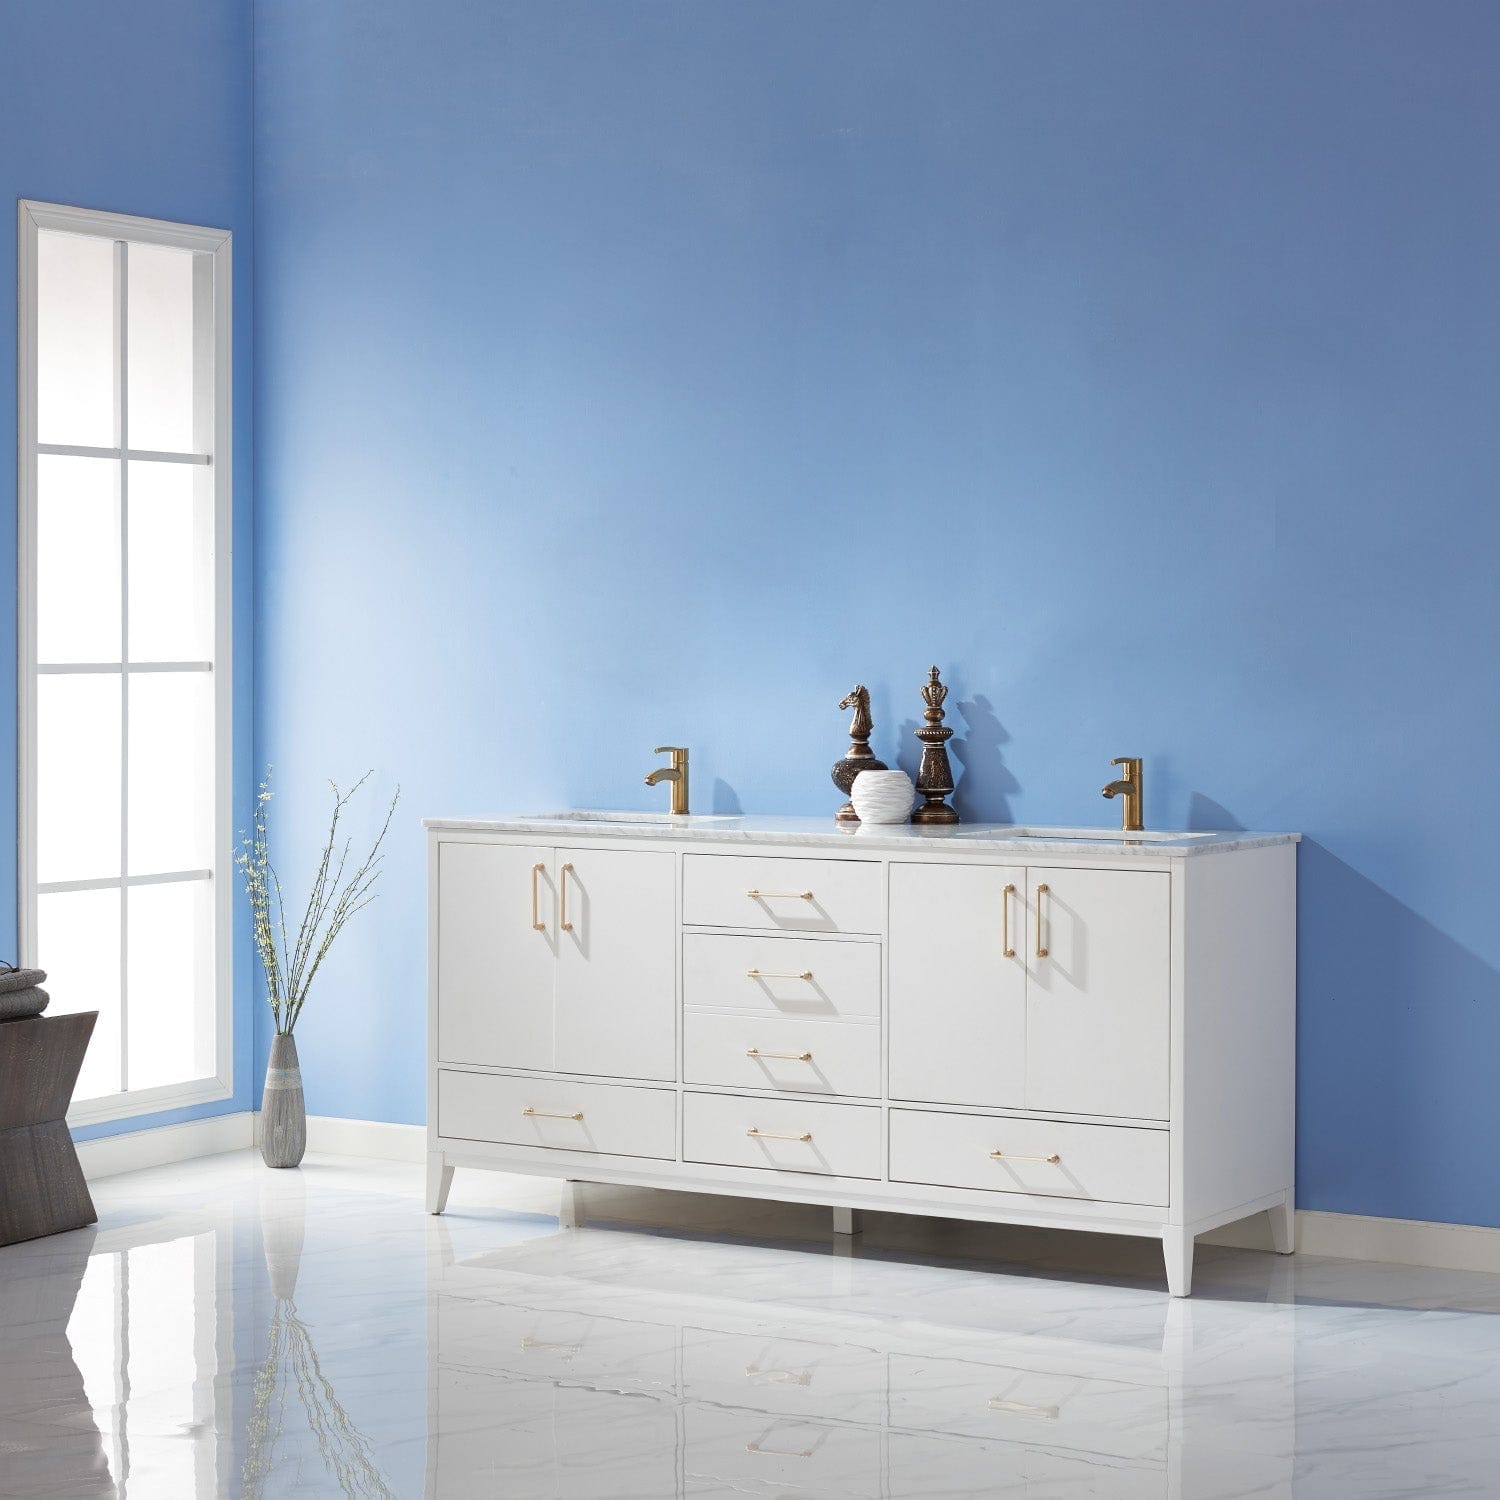 Altair Sutton 72" Double Bathroom Vanity Set in White and Carrara White Marble Countertop without Mirror 541072-WH-CA-NM - Molaix631112972048Vanity541072-WH-CA-NM